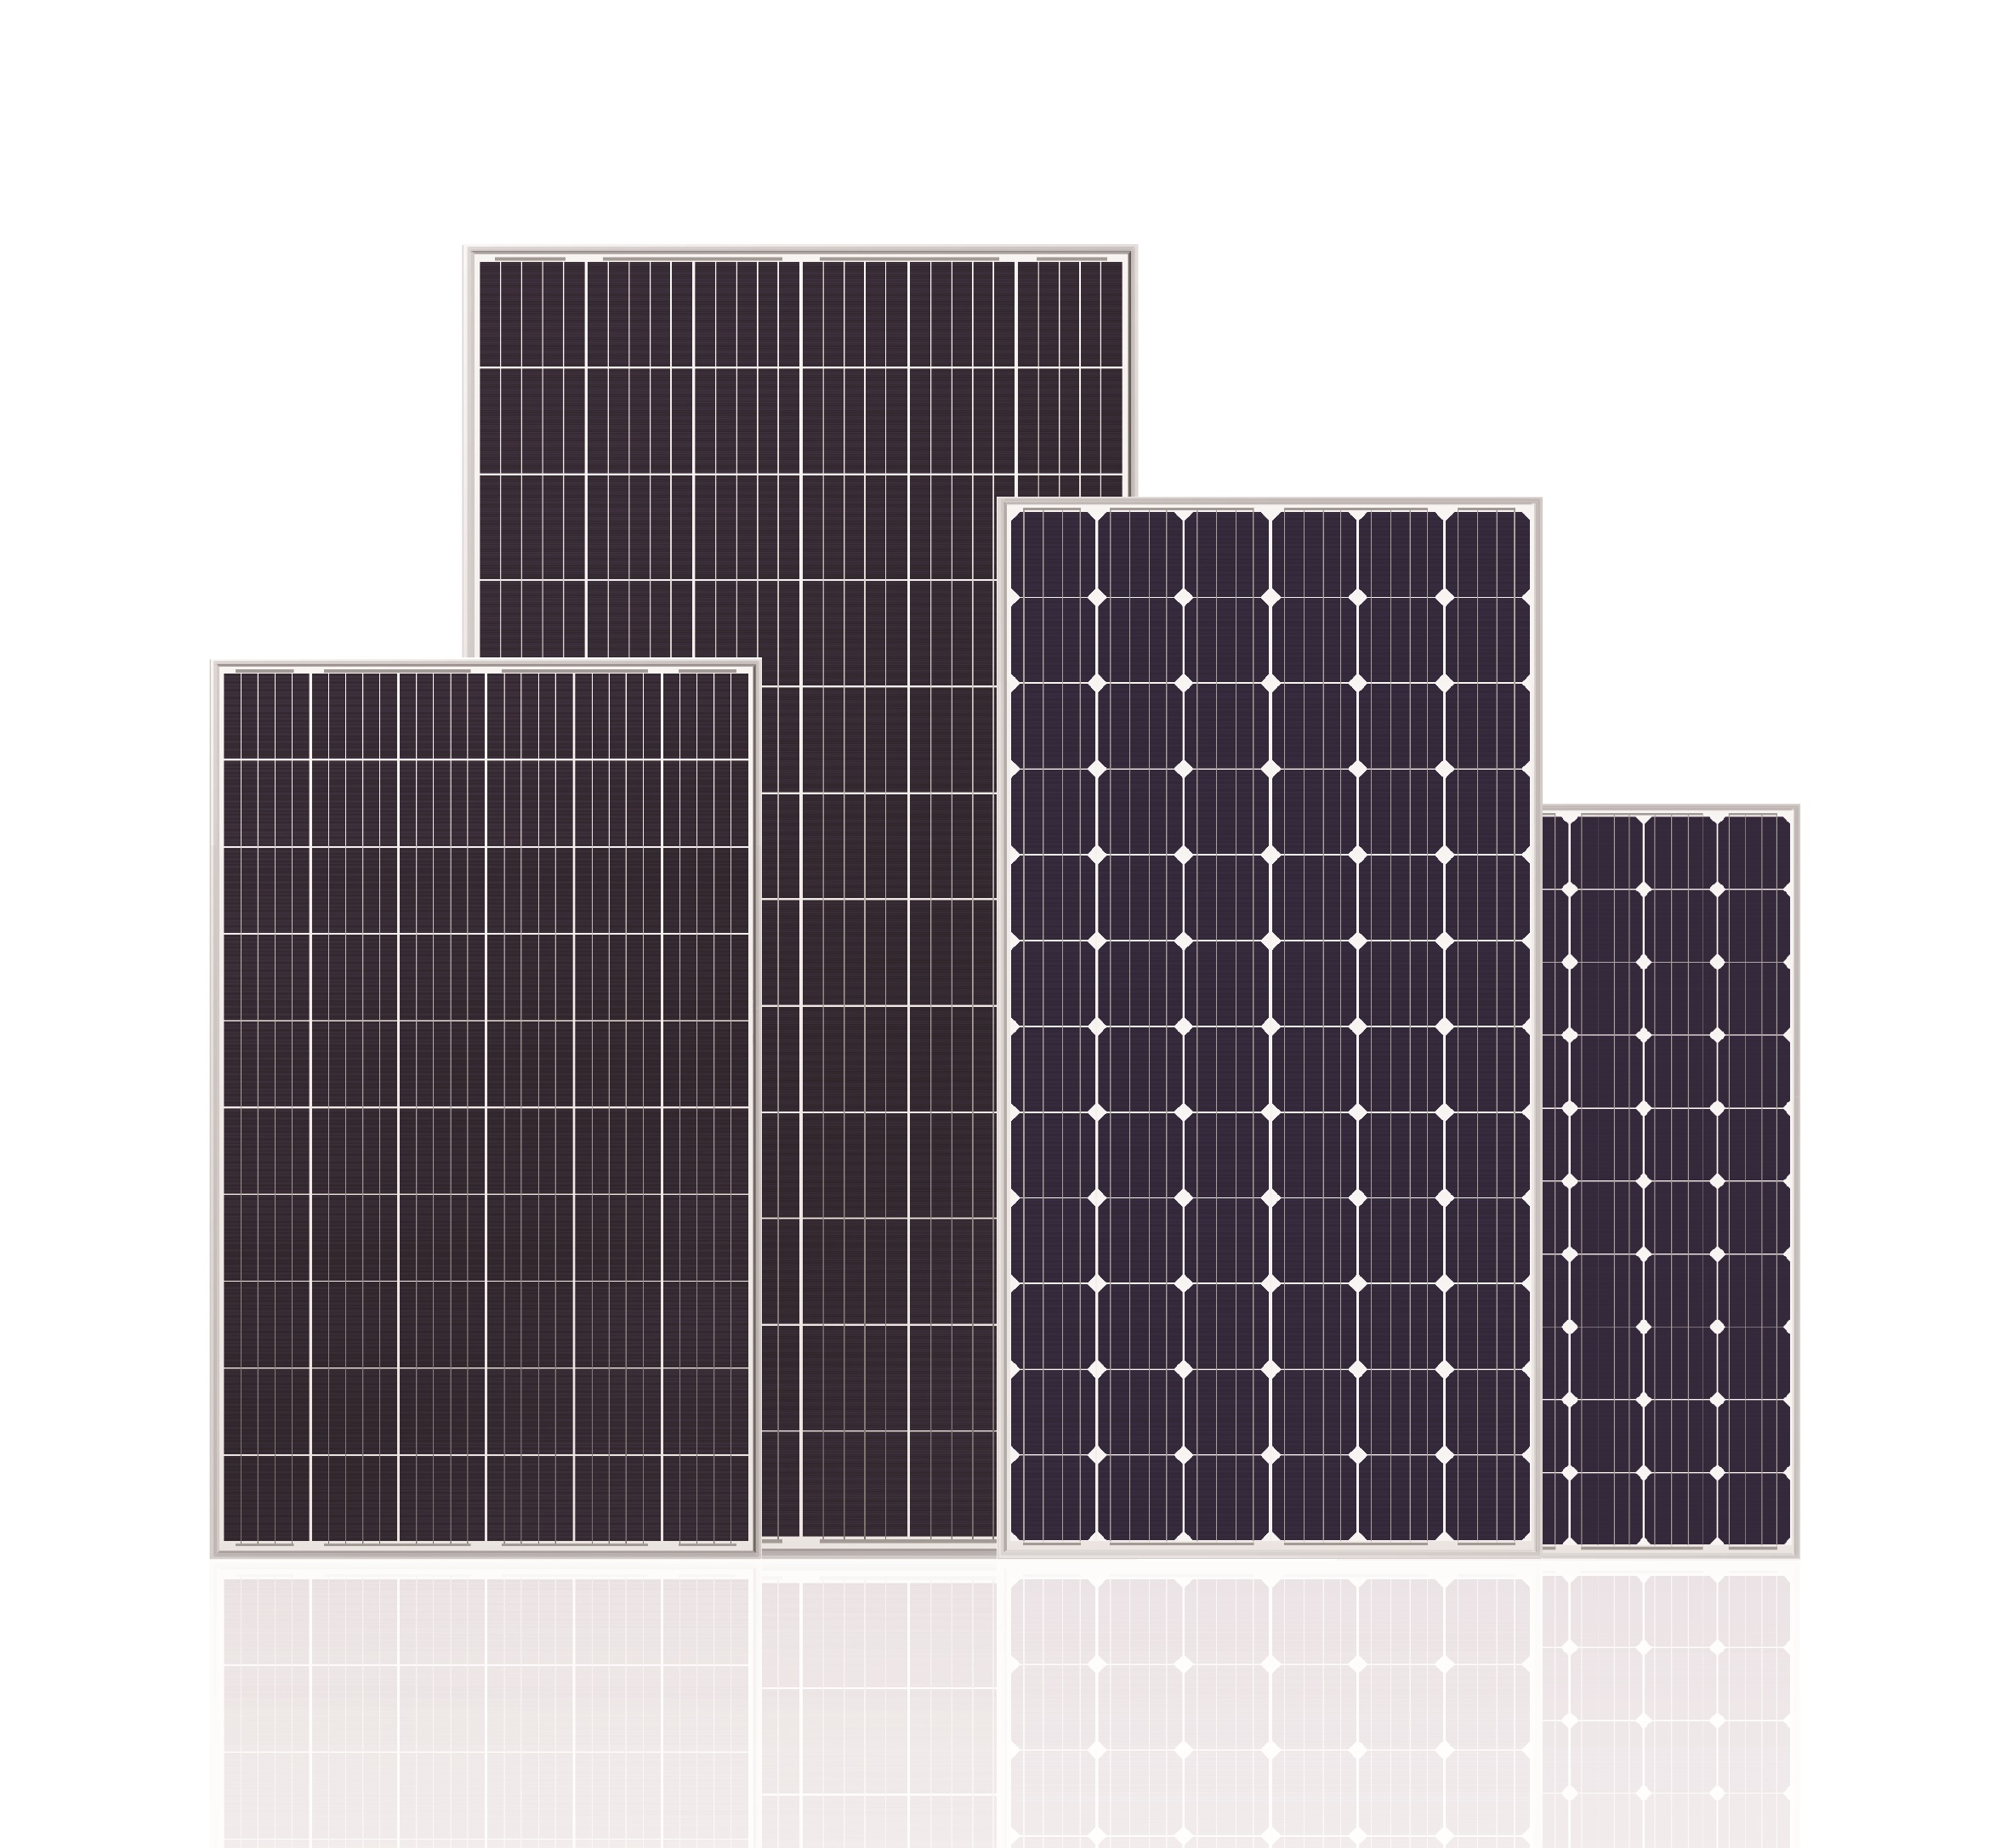 Seraphim standard solar modules, distributed by BSL Eco Energy